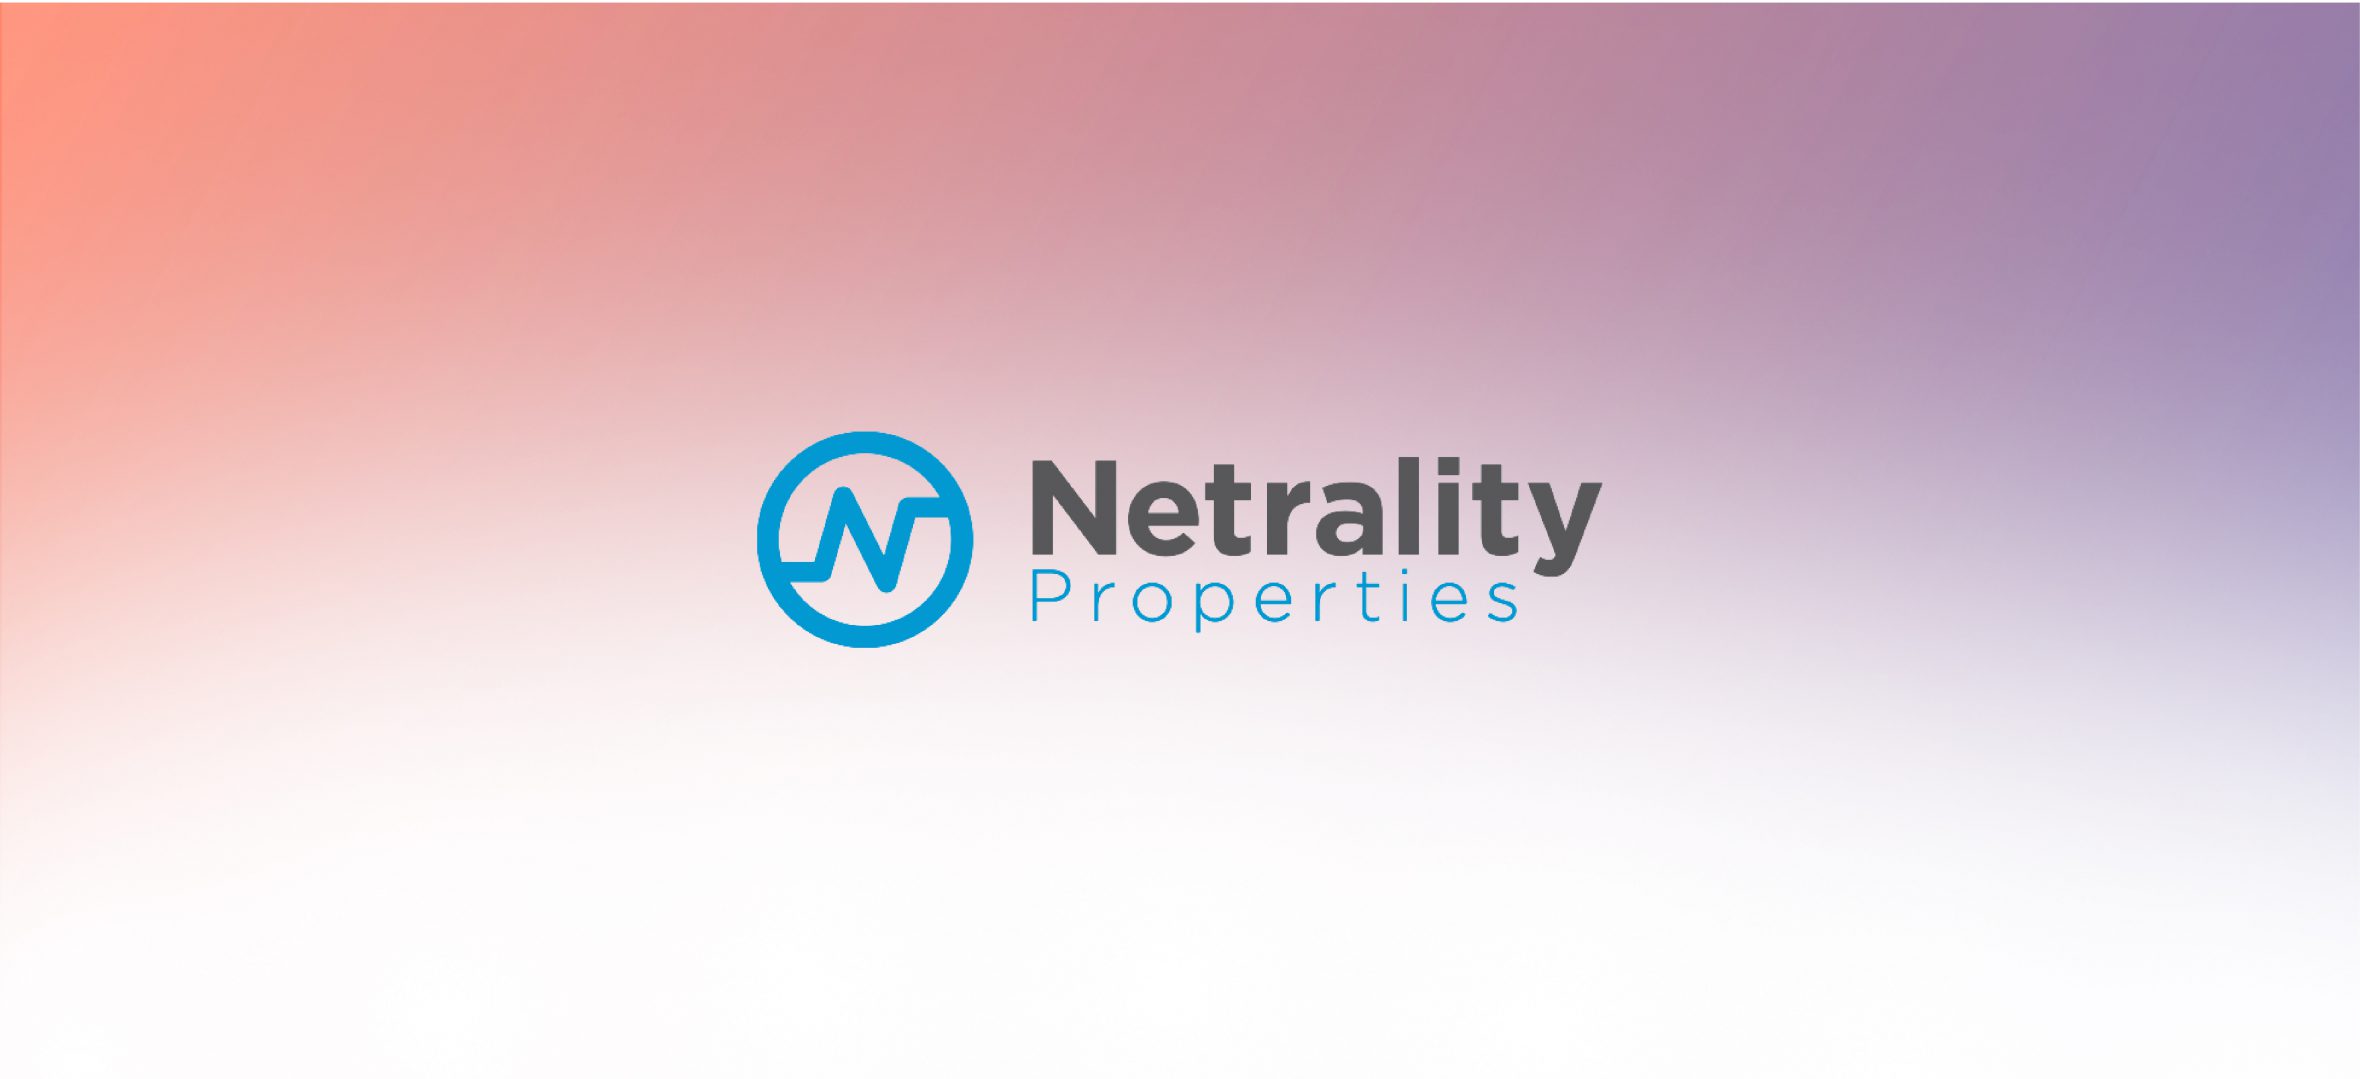 Epsilon Adds Direct Access to Cloud Connectivity for Netrality Properties’ Customers with It’s CloudLX Platform